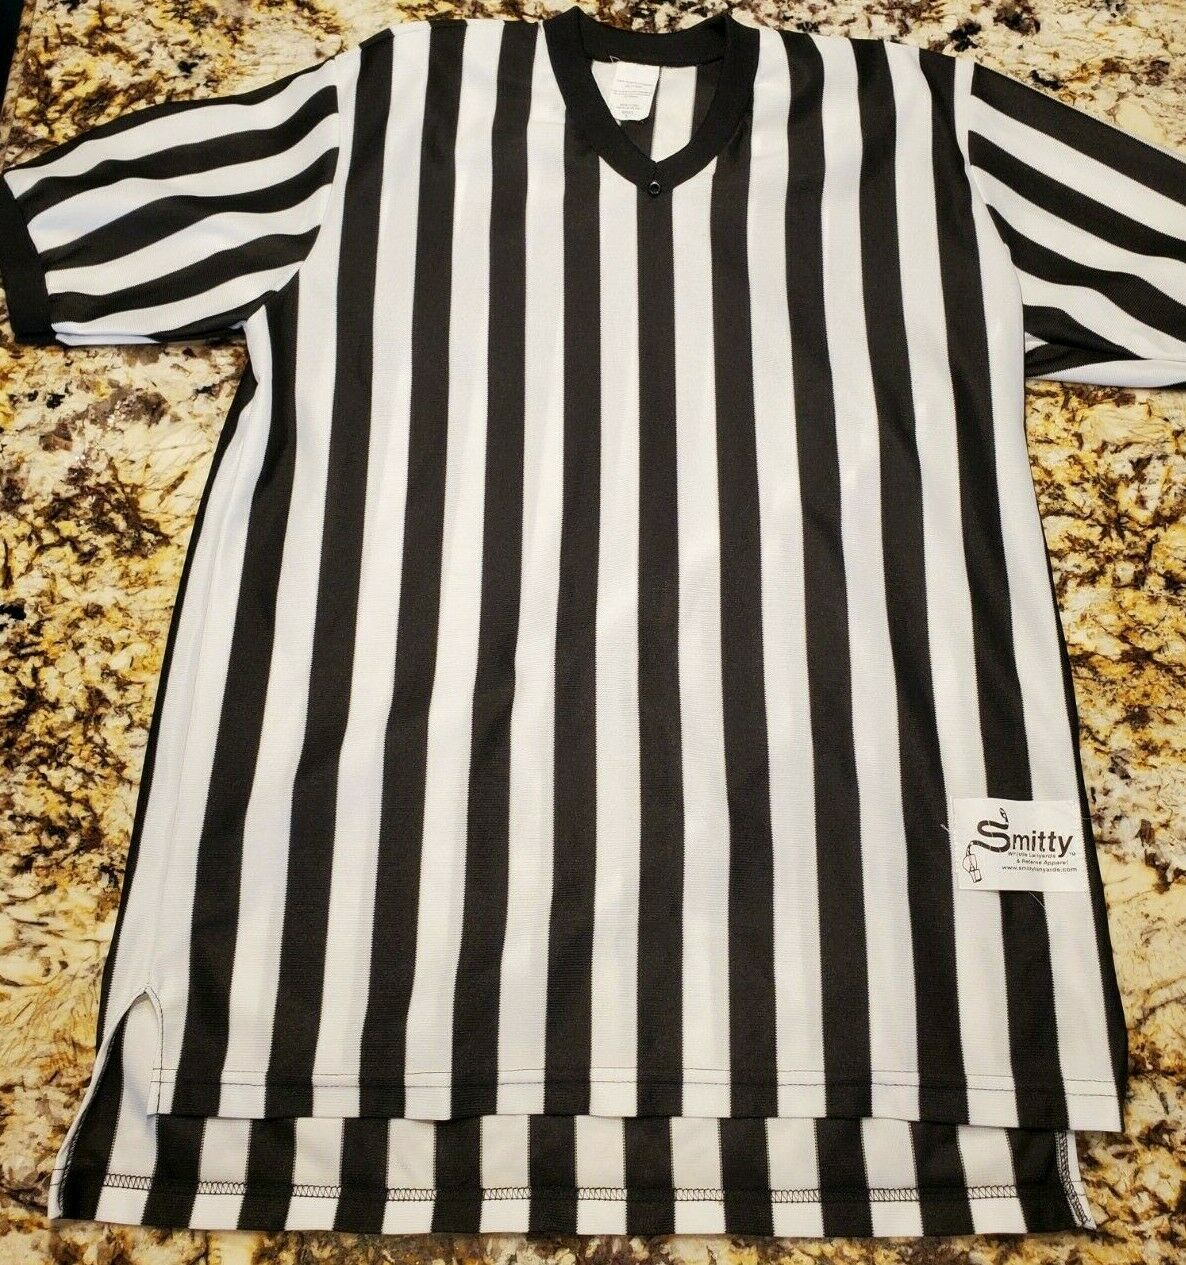 Smitty V-neck Referee Shirt- Size Large- 100% Polyester- Used/good Condition